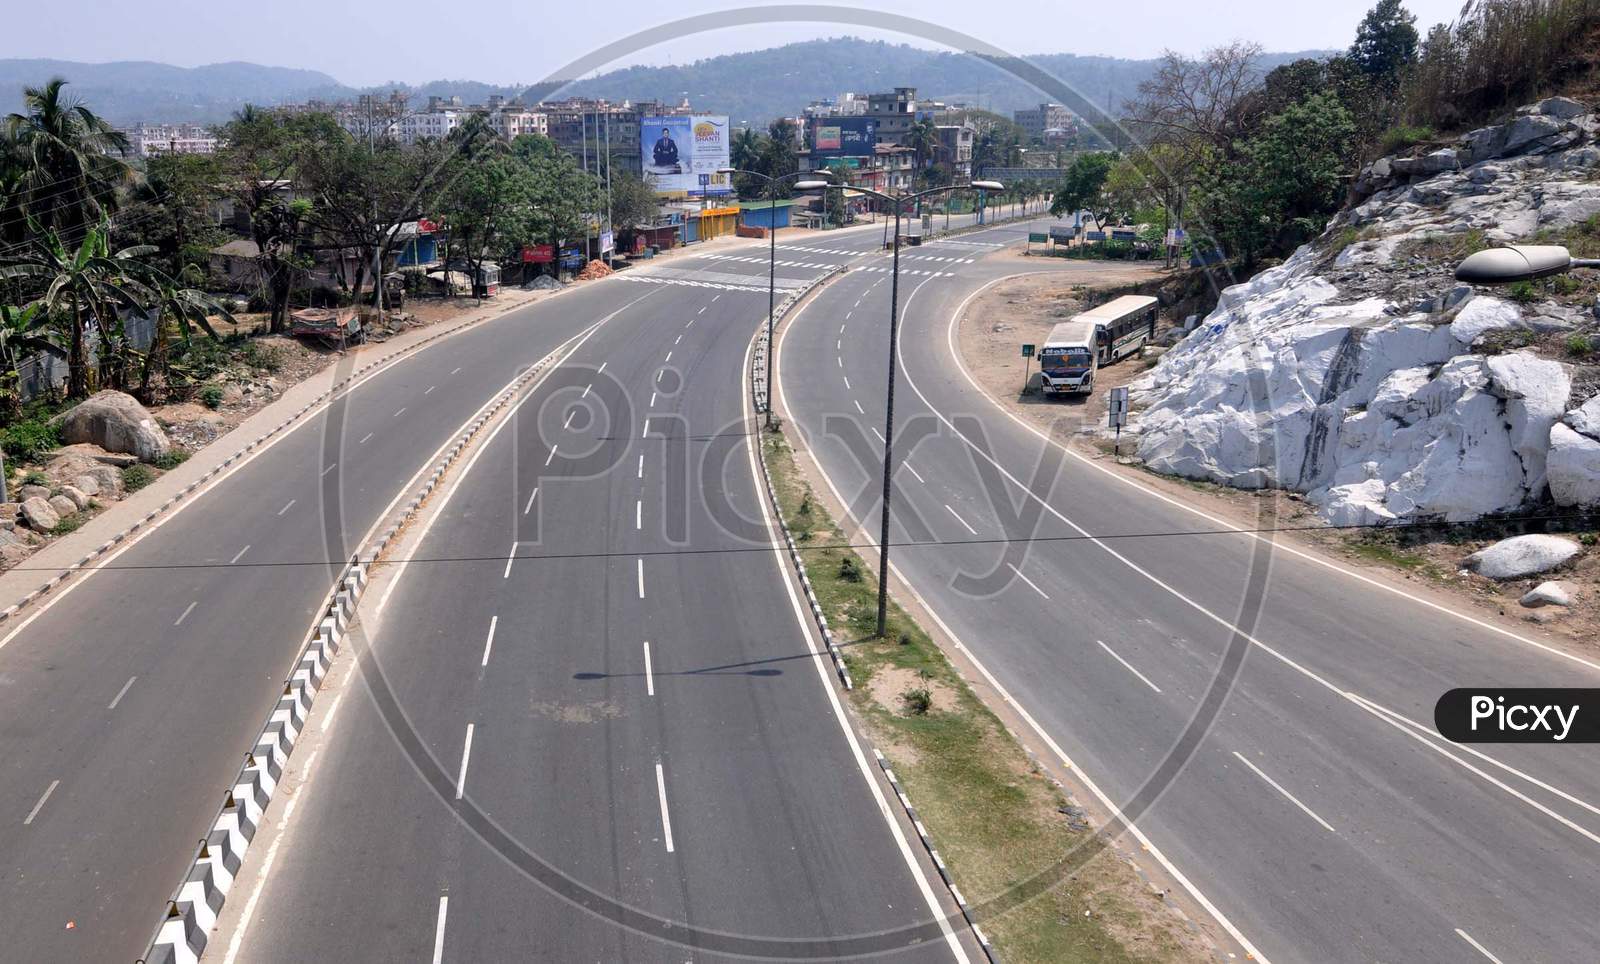 A Deserted View Of A 37 National Highway During Lockdown In Wake Of Corona Virus Pandemic In Guwahati On Wednesday, 25 March 2020